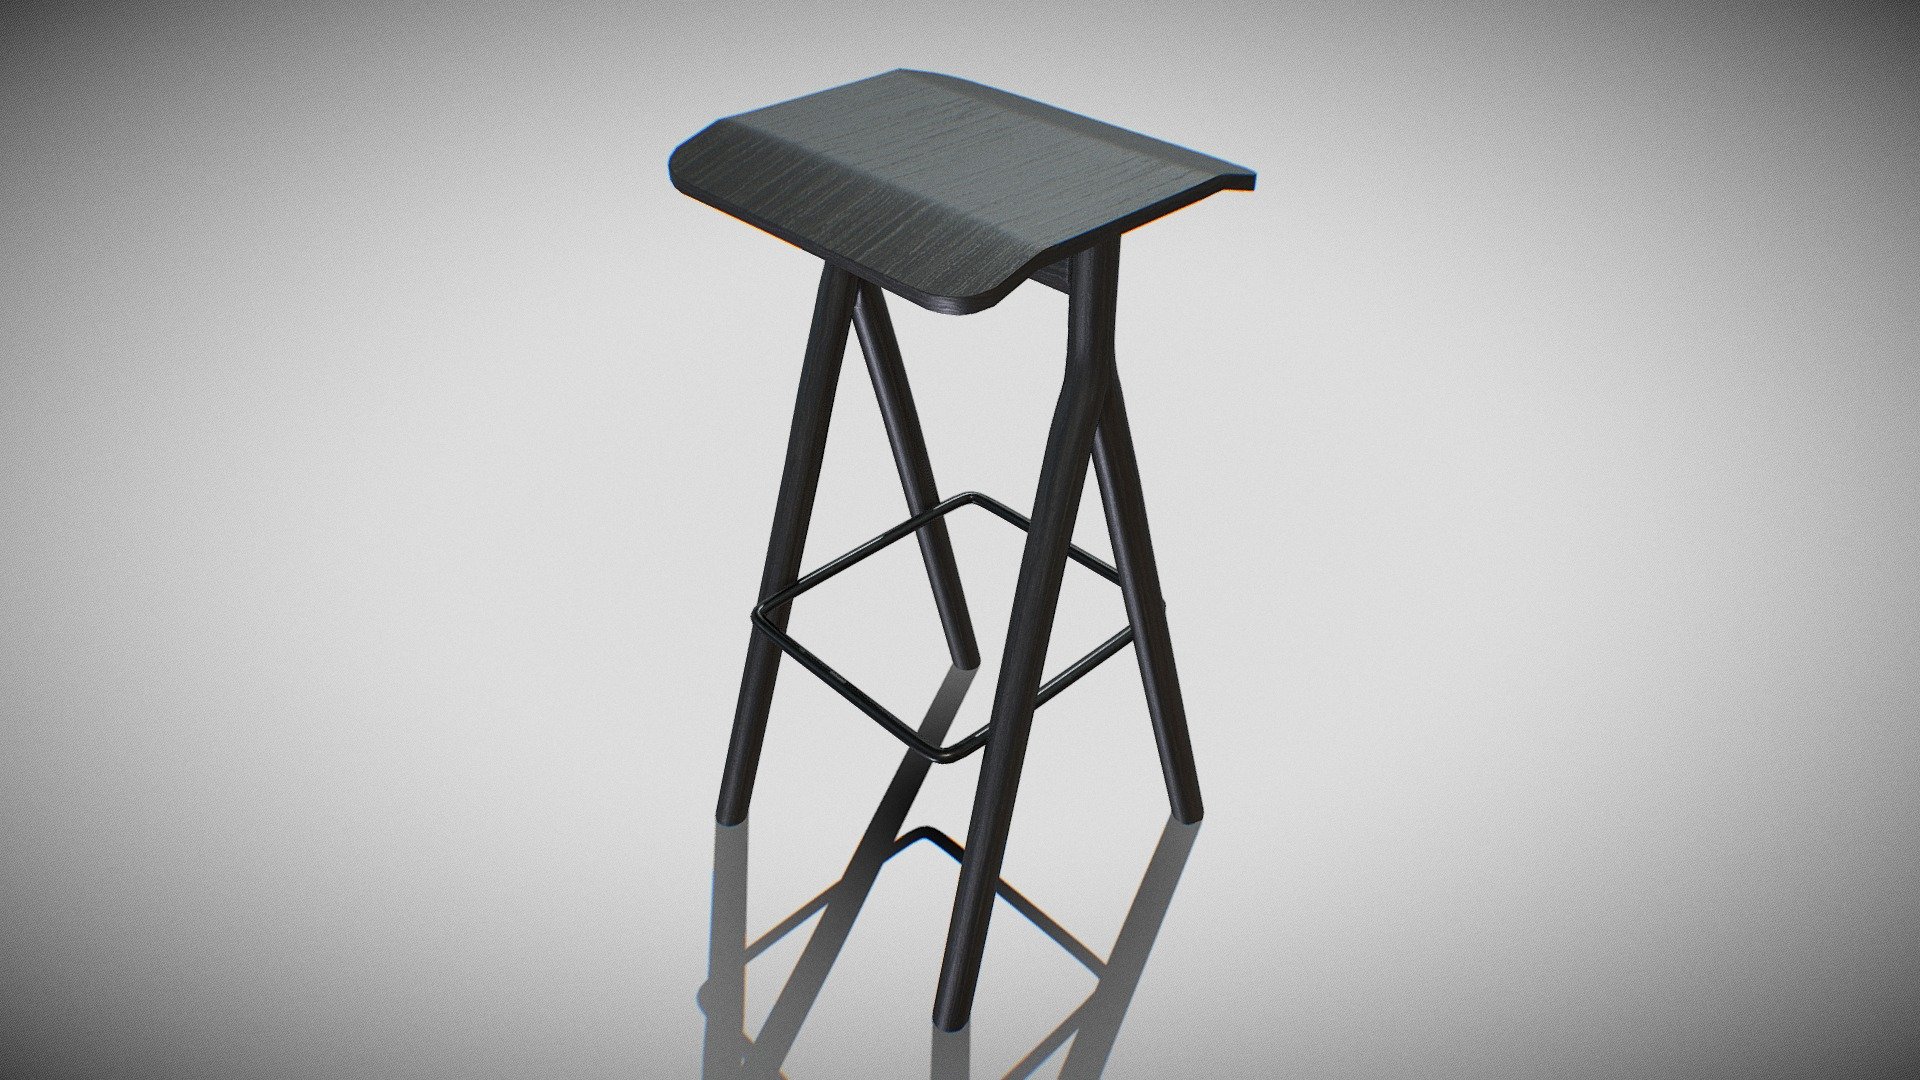 Stool 3d model ready for VirtualReality(VR),Augmented Reality(AR),games and other render engines.This lowpoly 3d model of stool is equipped with 4k resolution textures.The PBR_Maps includes- albedo,roughness,metallic and normal 3d model